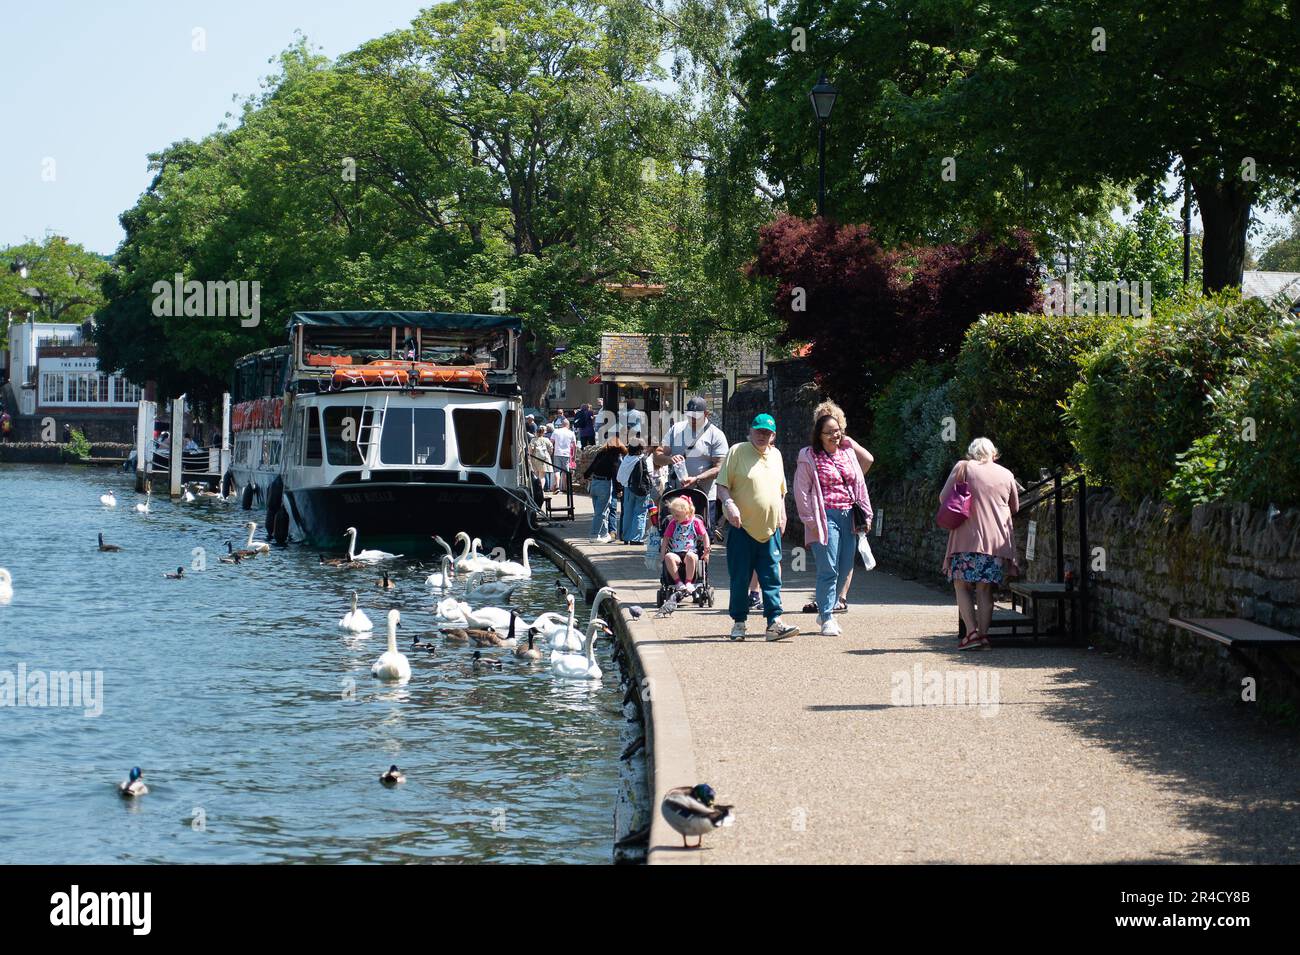 Windsor, Berkshire, UK. 27th May, 23. People walking along the Thames Path in Windsor. It was a beautiful warm and sunny day in Windsor Berkshire today as people flocked to the town for boat trips on the River Thames. Credit: Maureen McLean/Alamy Live News Stock Photo